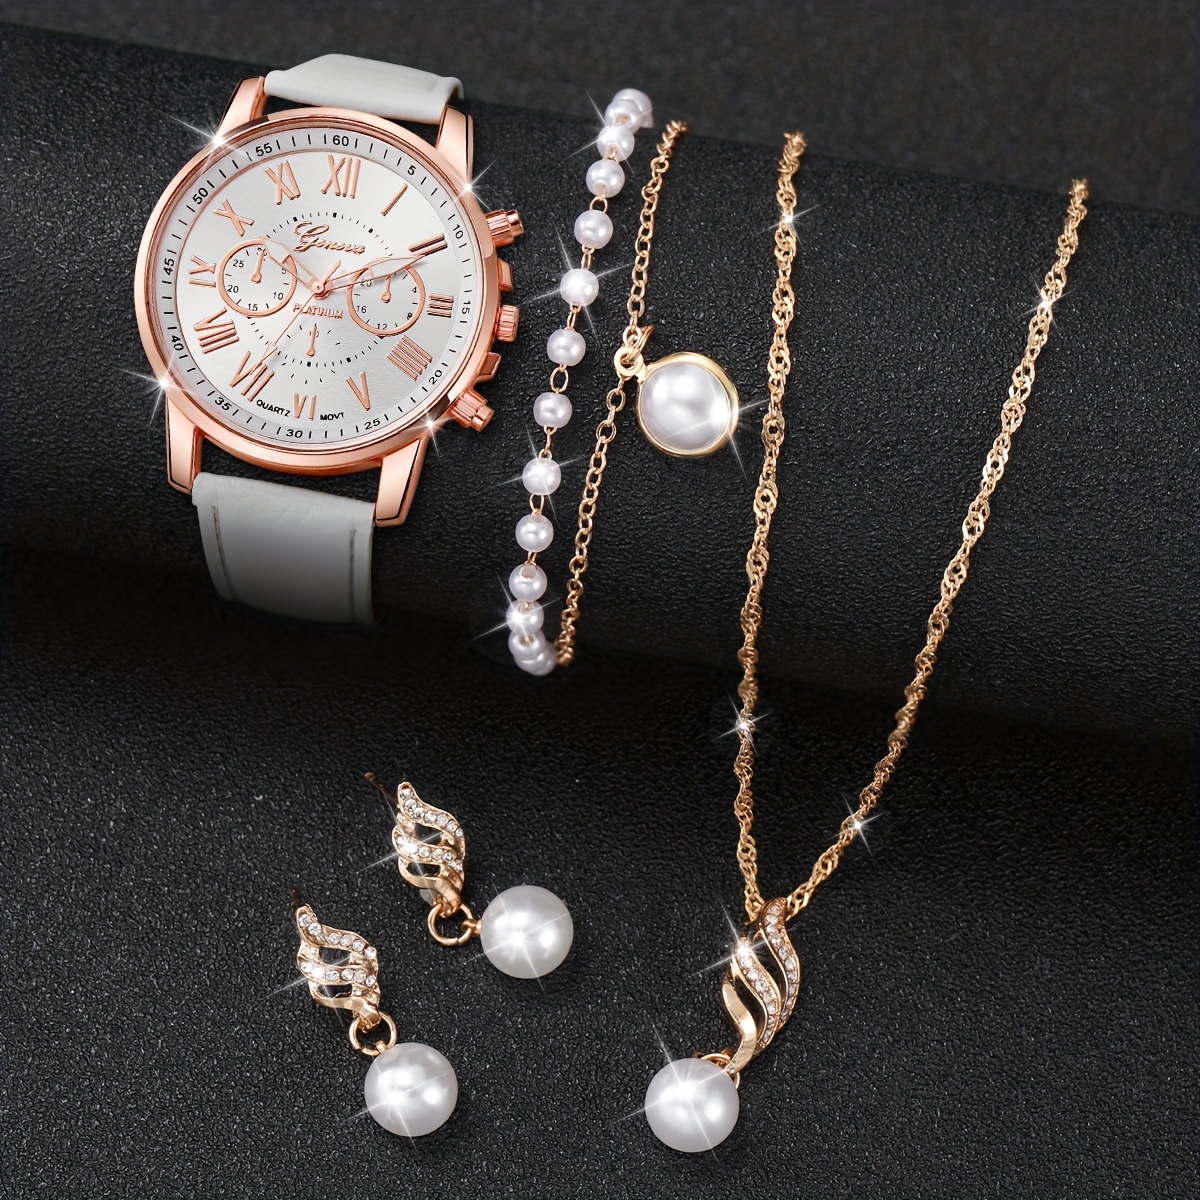 5pcs set womens watch casual round pointer quartz watch pu leather wrist watch faux pearl jewelry set gift for mom her details 0